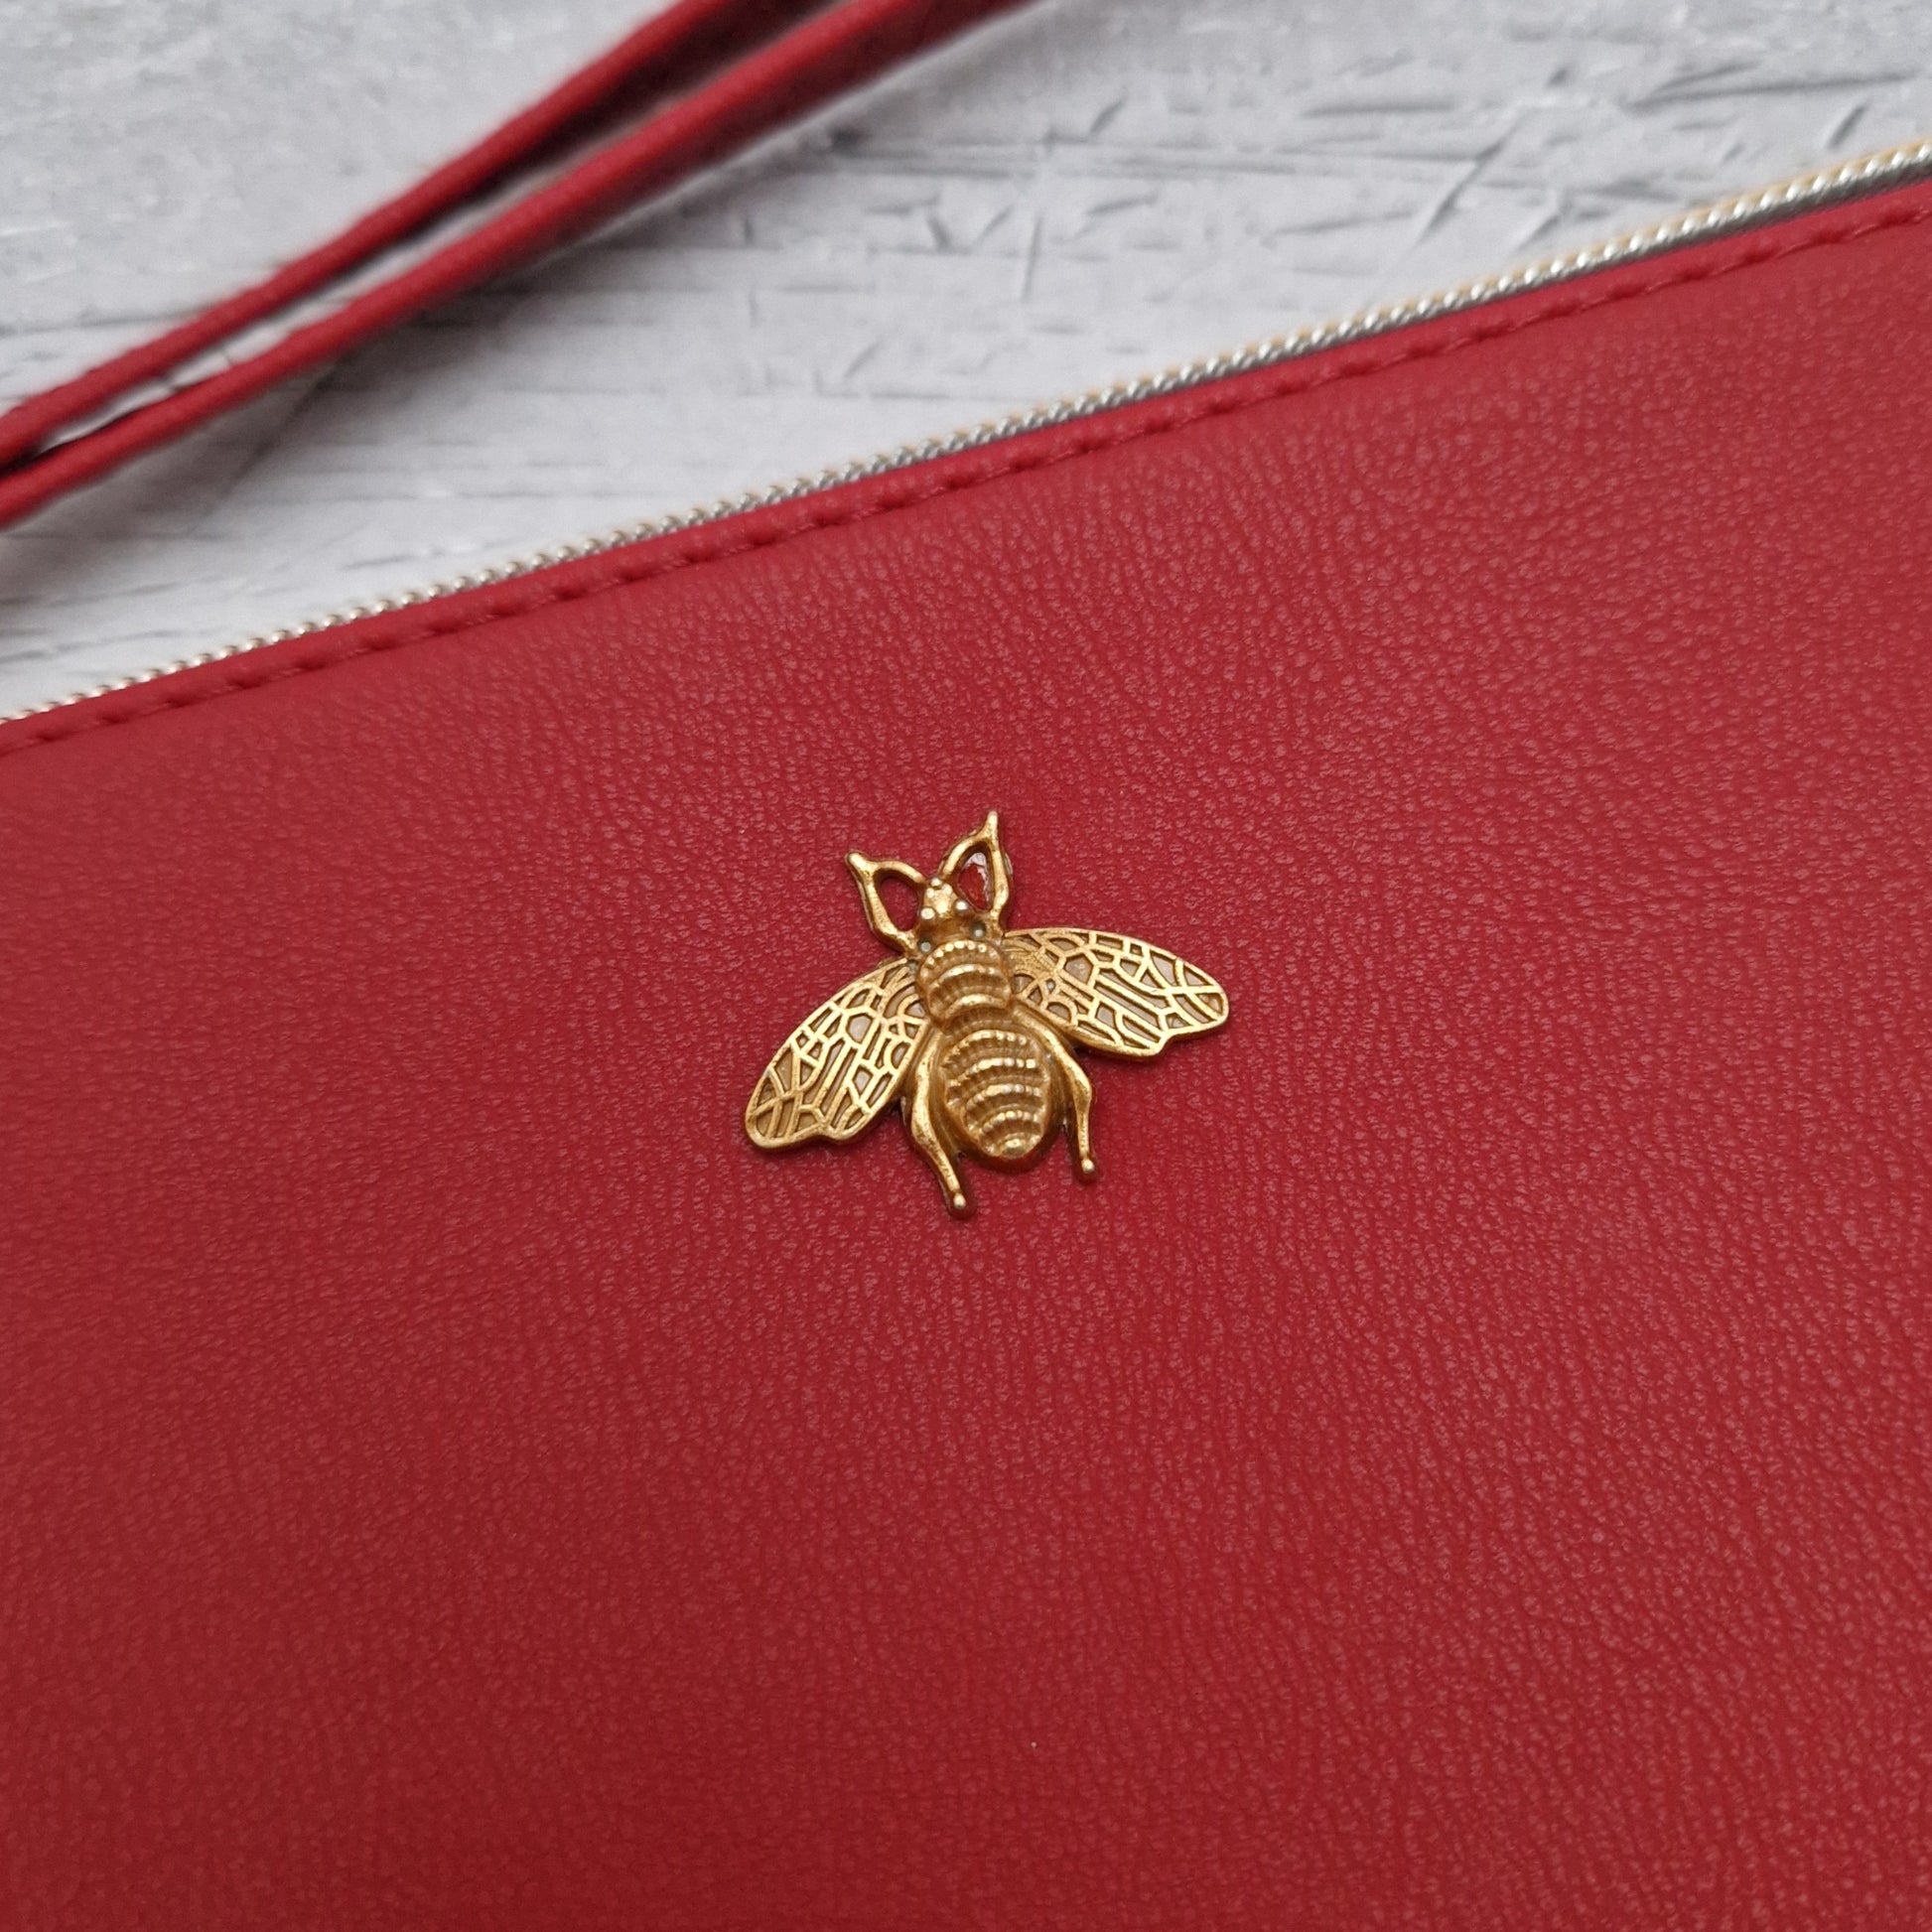 Red Clutch bag with a gold bee emblem.